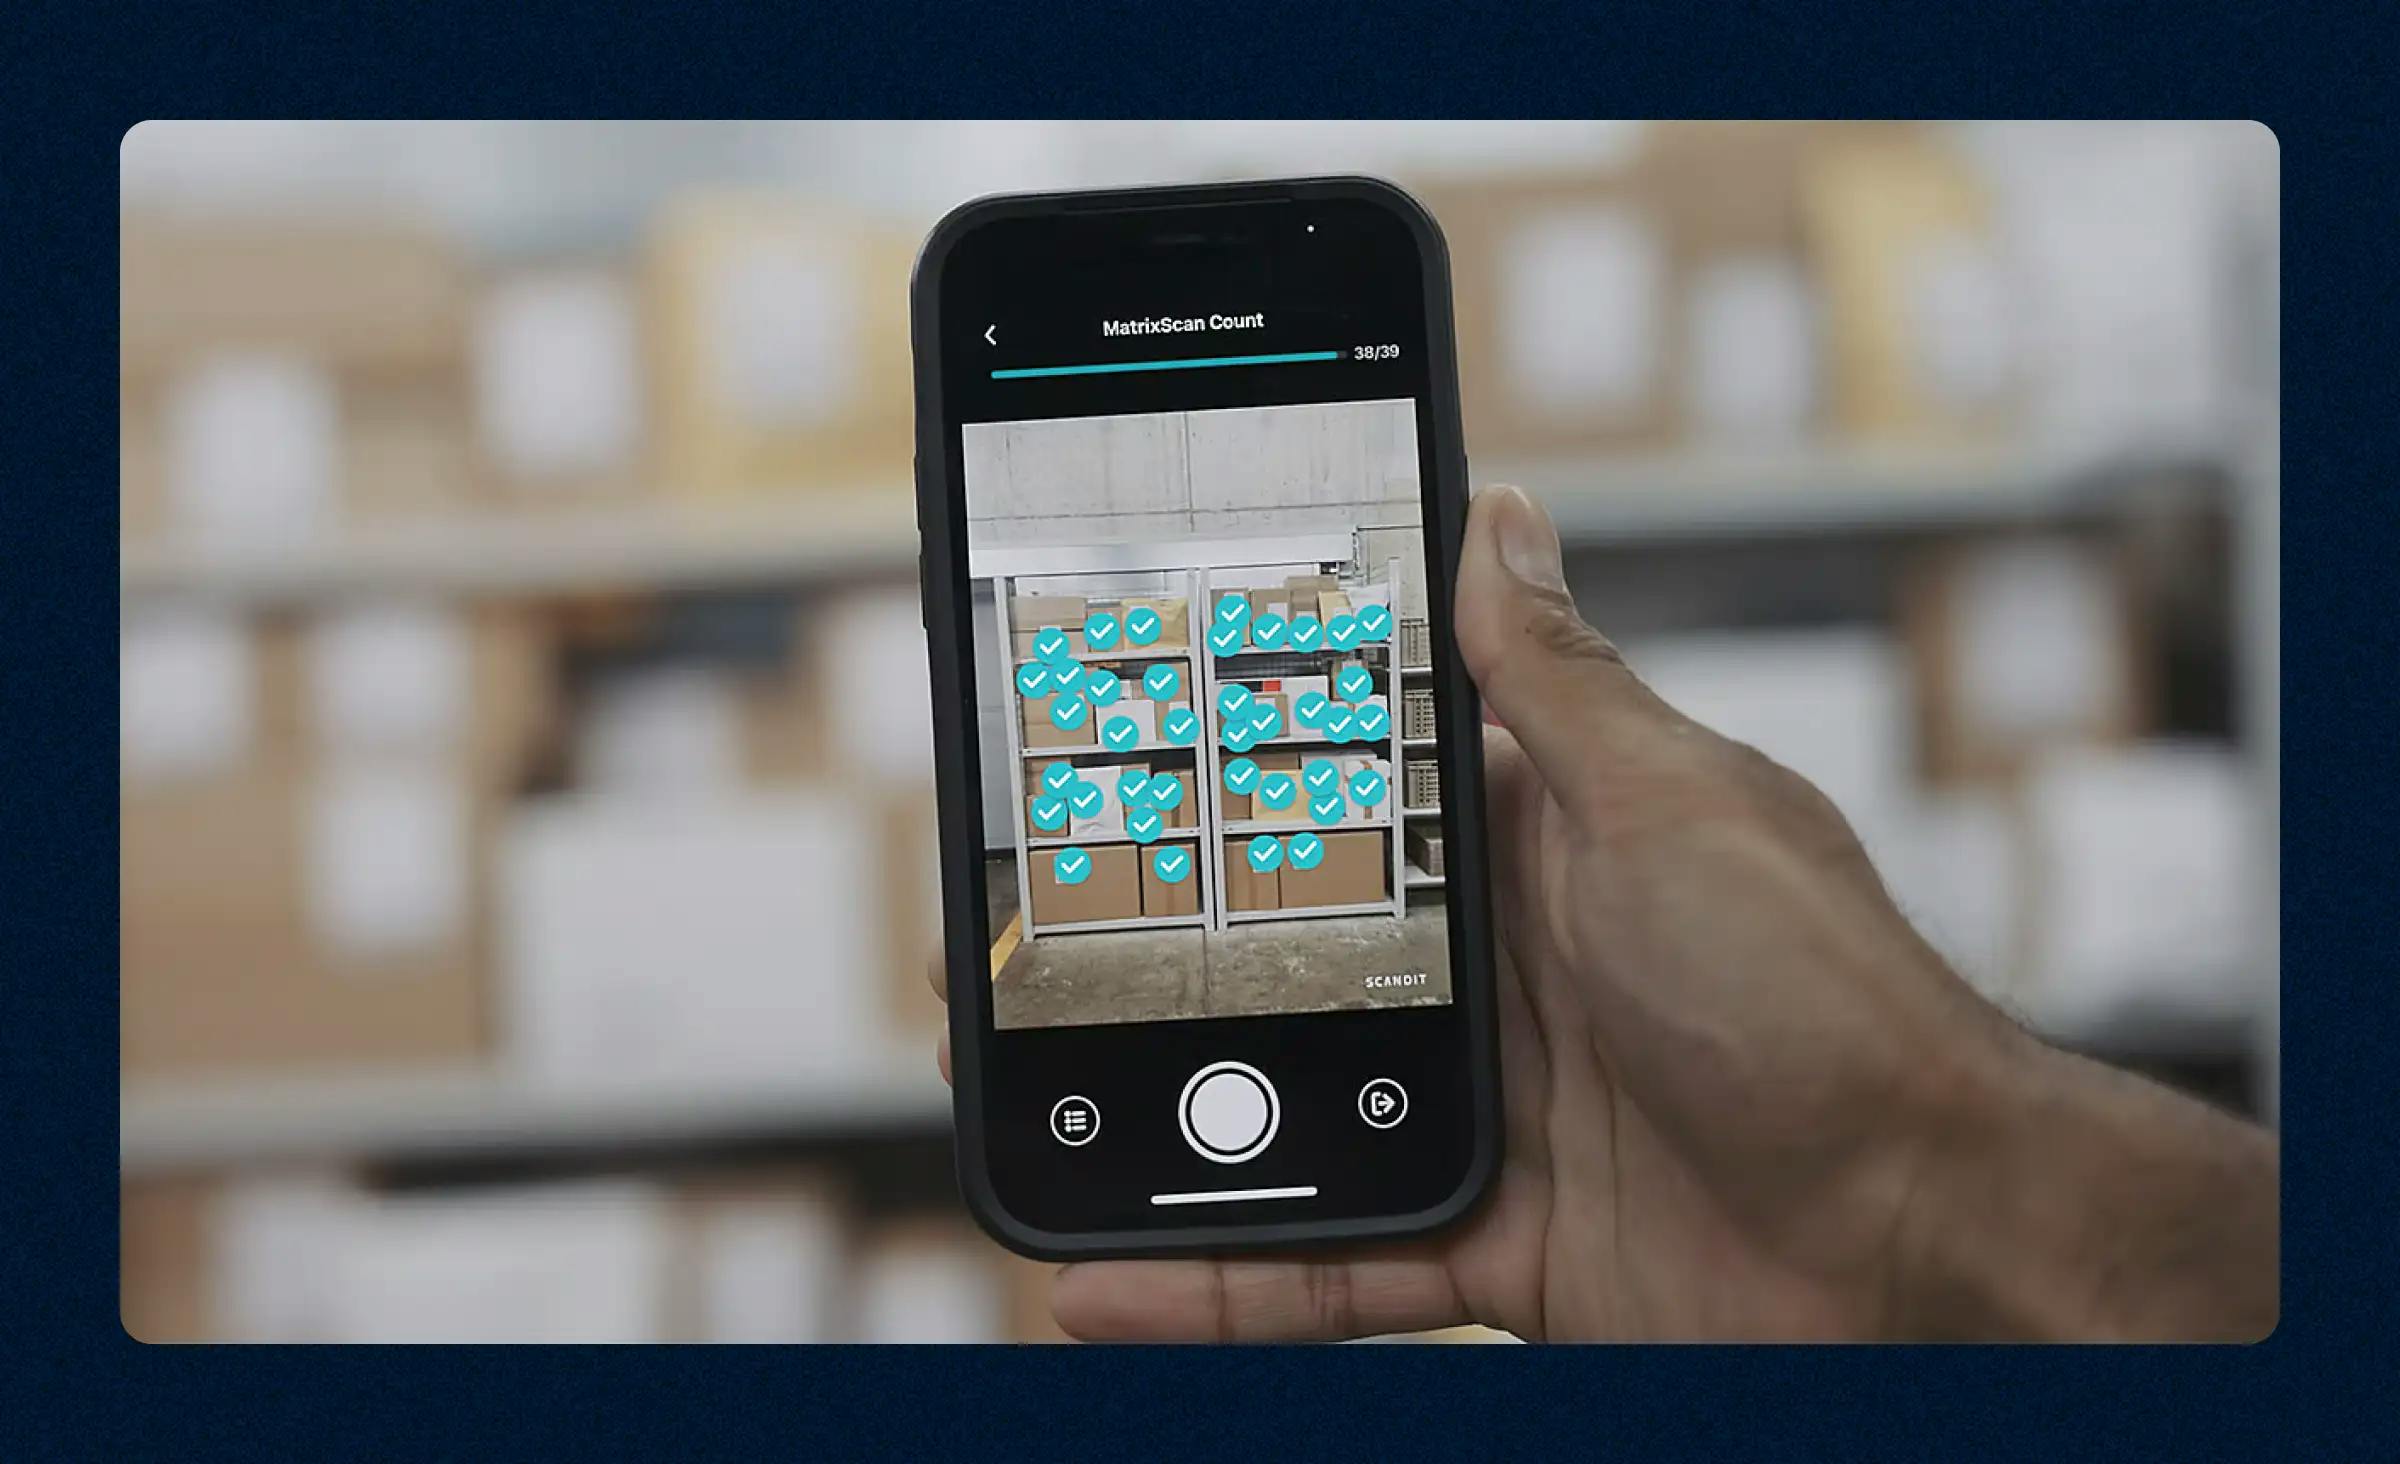 A screenshot from a Scandit commercial video demonstrates how the app uses enterprise AI technology to scan and identify boxes.